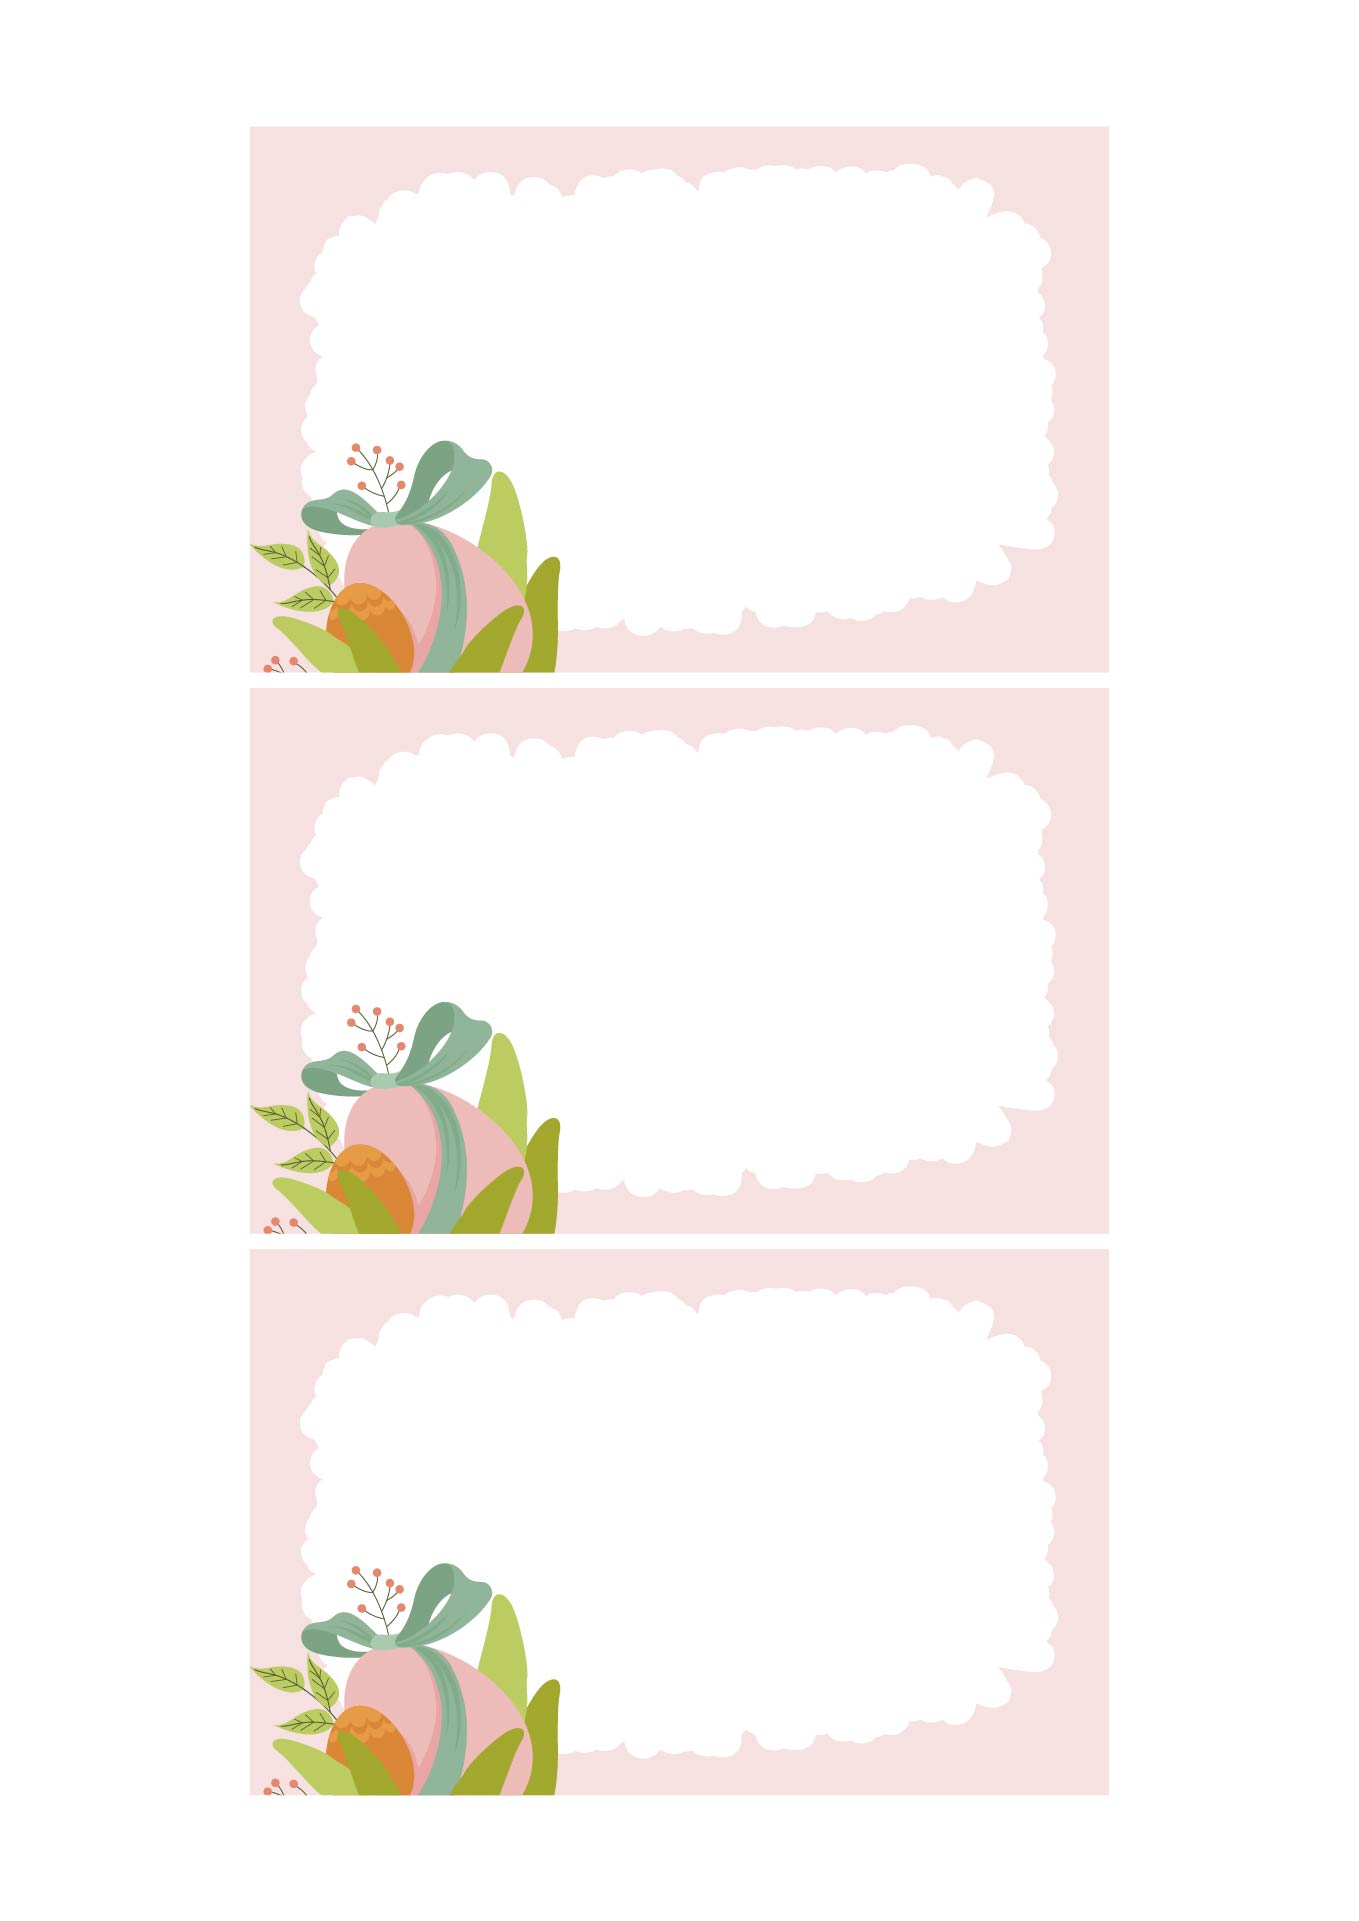 Printable Easter Tags Labels